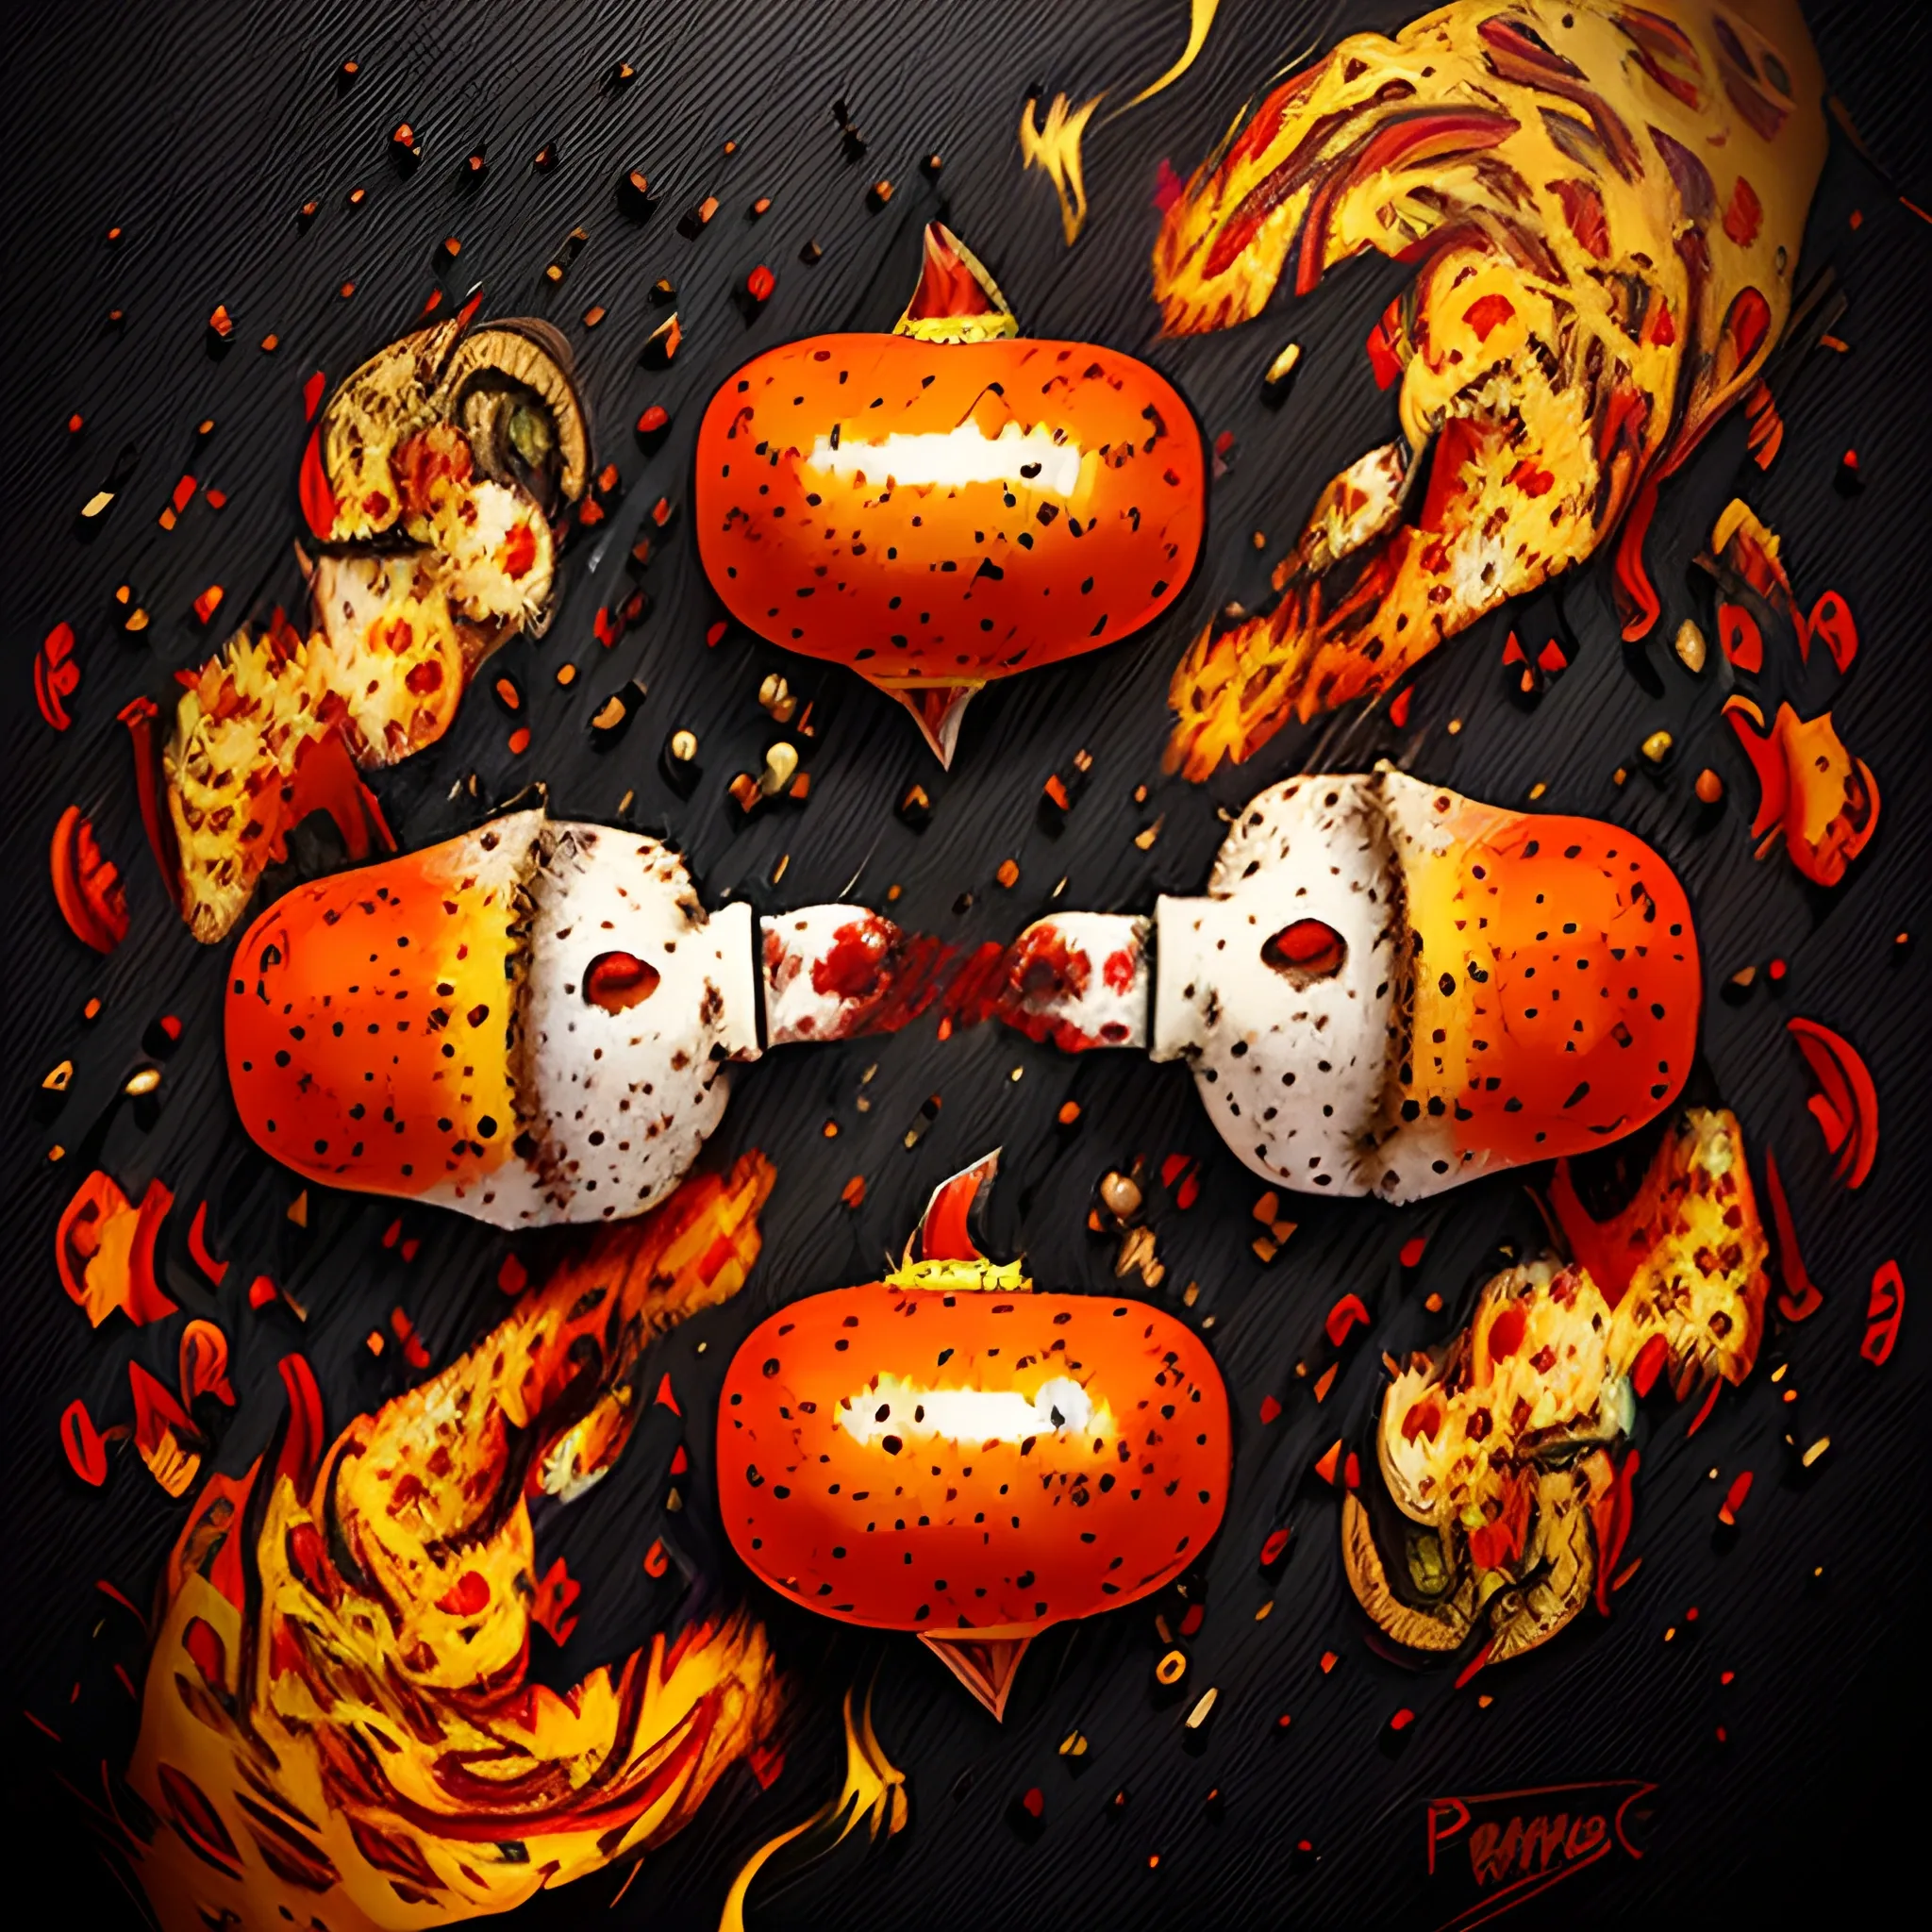 smoked pepper fights with burned food, cartoon art, epic style, high resolution, awesome quality, quality art, paining

